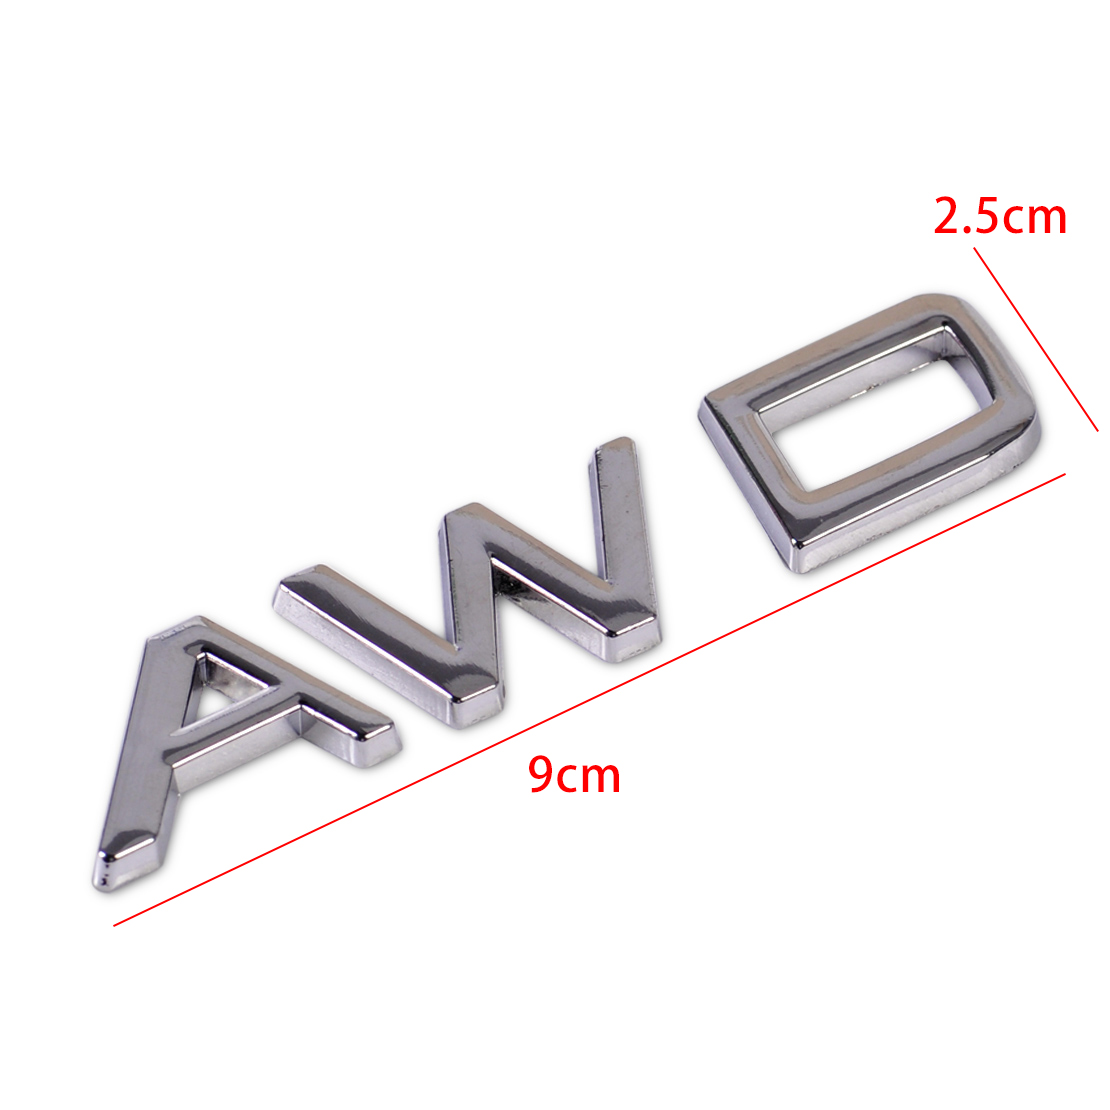 Silver AWD Metal Emblem Sticker Badge Decal for 4 Wheel Drive Car SUV Tailgate